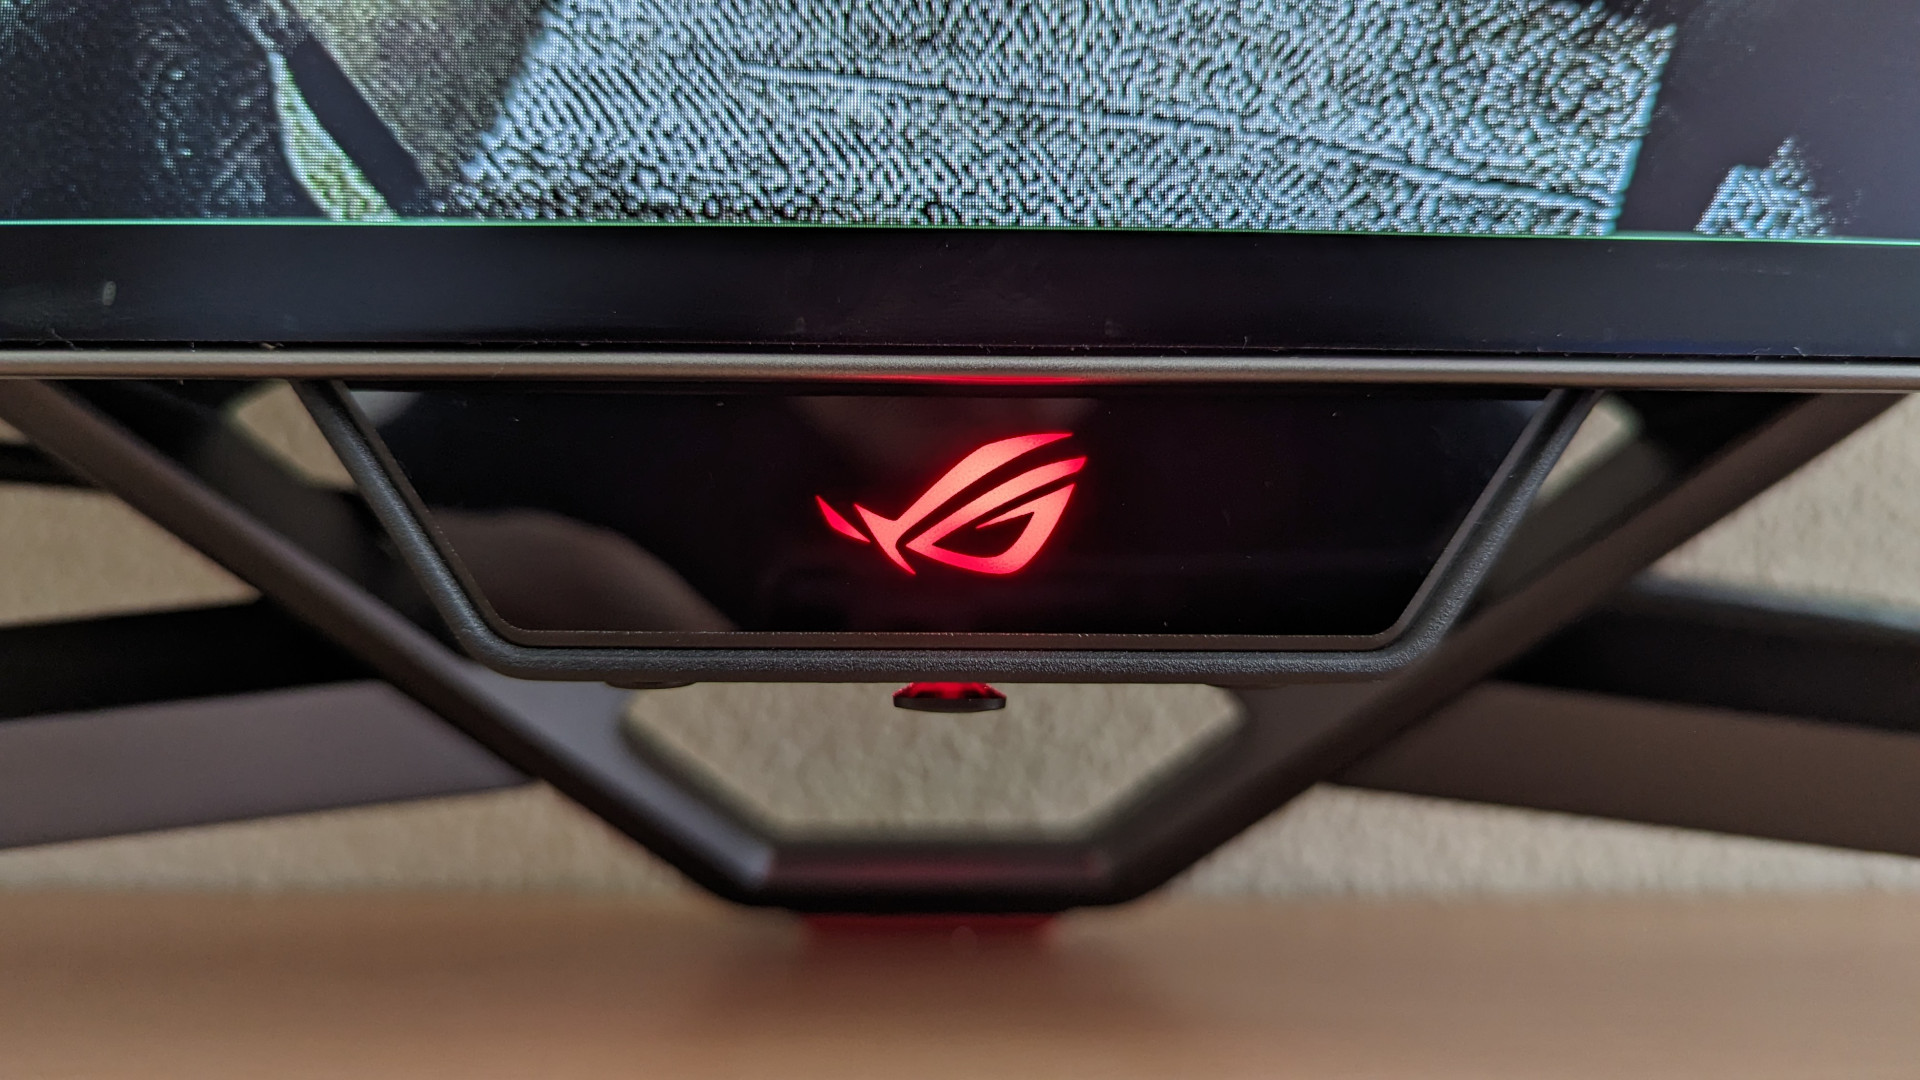 A close up of the power LED indicator on the Asus ROG Swift PG48UQ gaming monitor